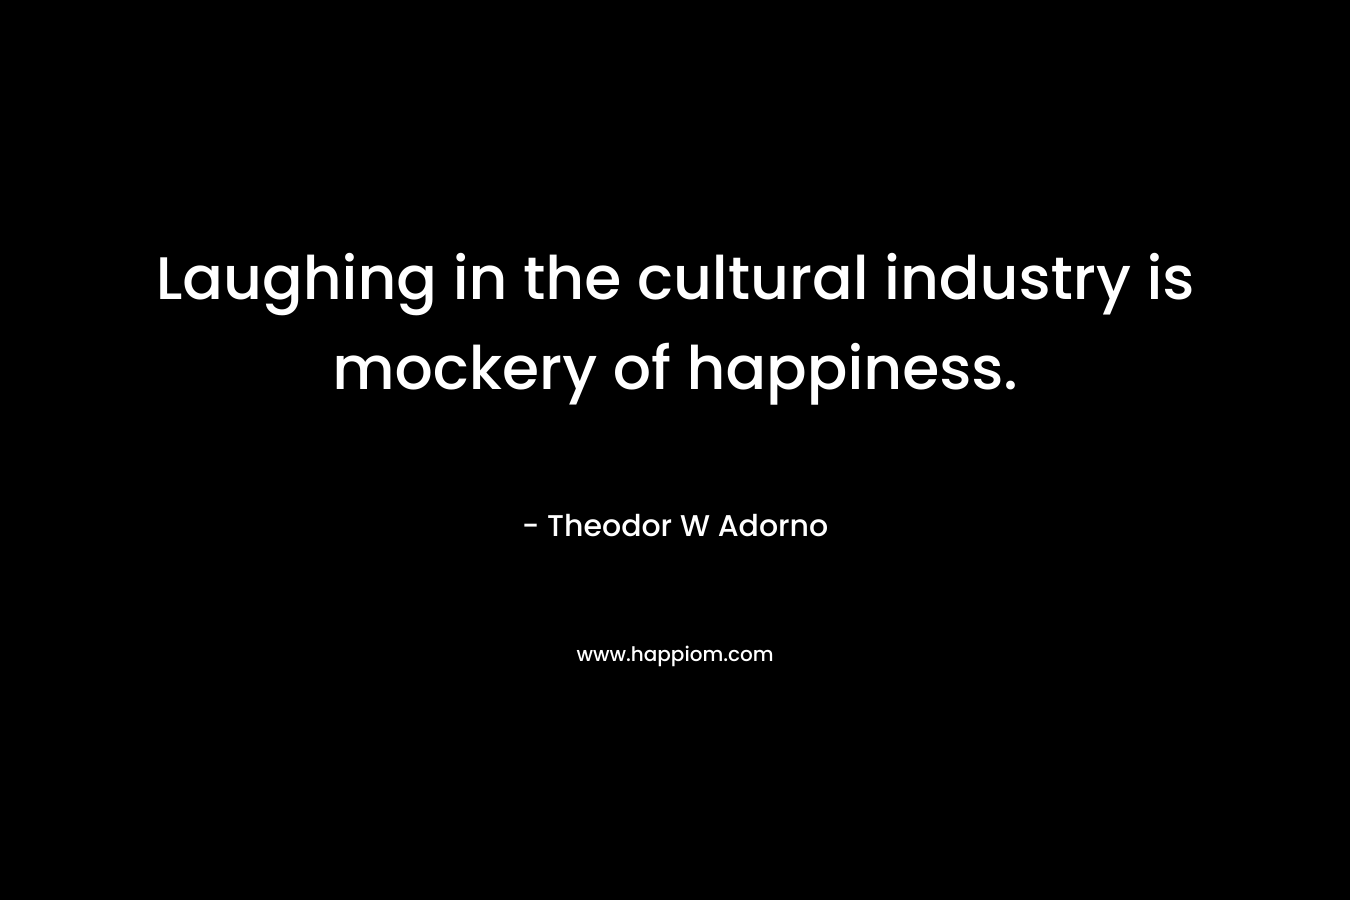 Laughing in the cultural industry is mockery of happiness.